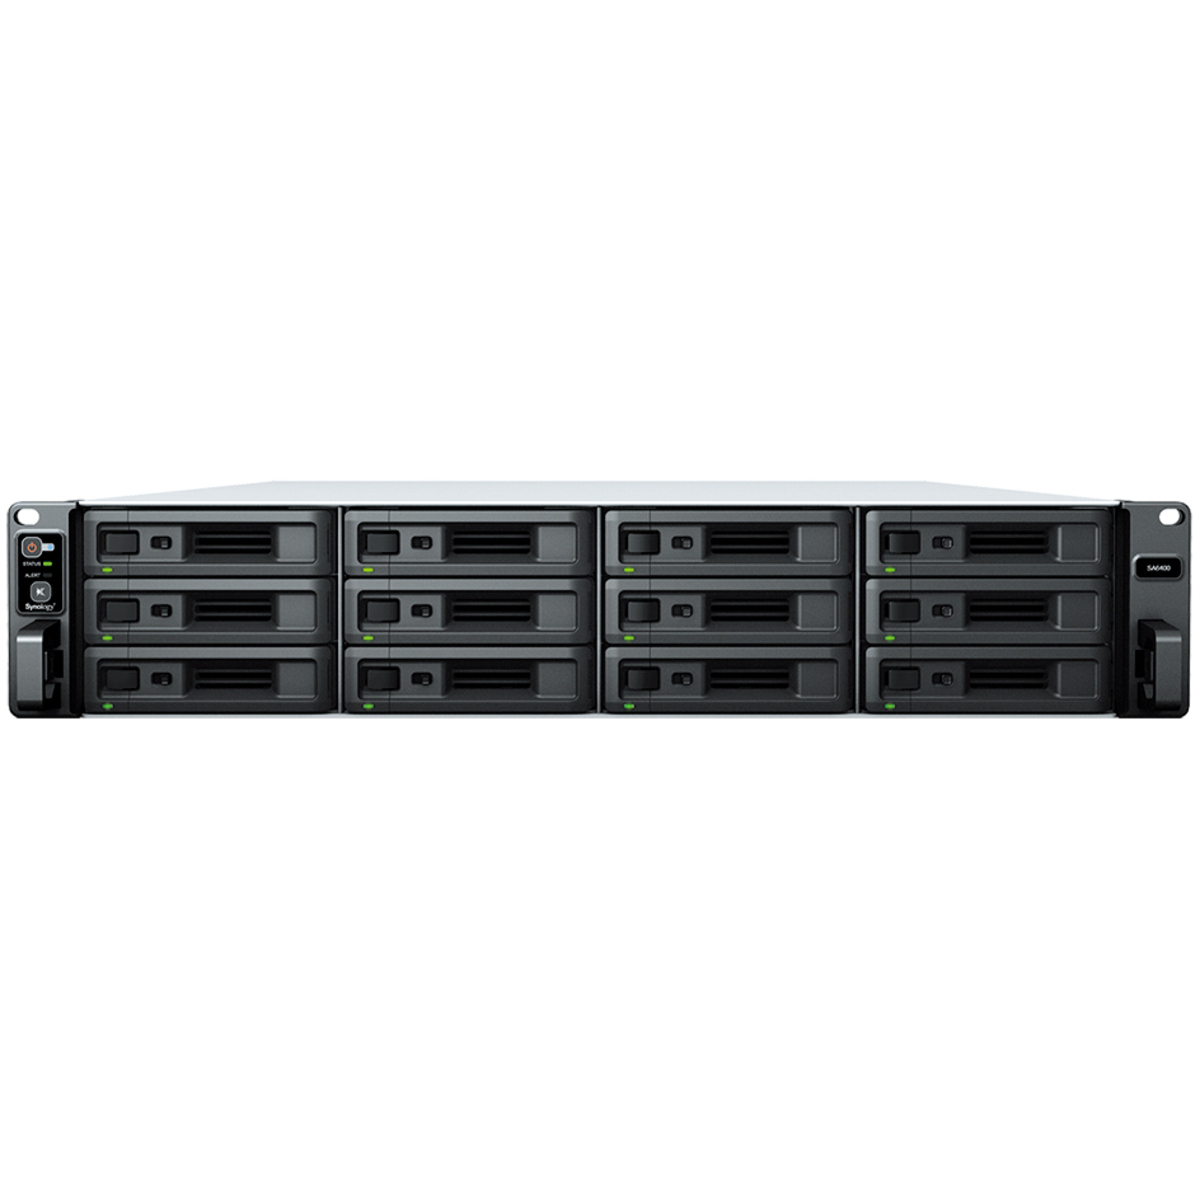 Synology RackStation SA6400 120tb 12-Bay RackMount Large Business / Enterprise NAS - Network Attached Storage Device 12x10tb Western Digital Red Pro WD102KFBX 3.5 7200rpm SATA 6Gb/s HDD NAS Class Drives Installed - Burn-In Tested RackStation SA6400